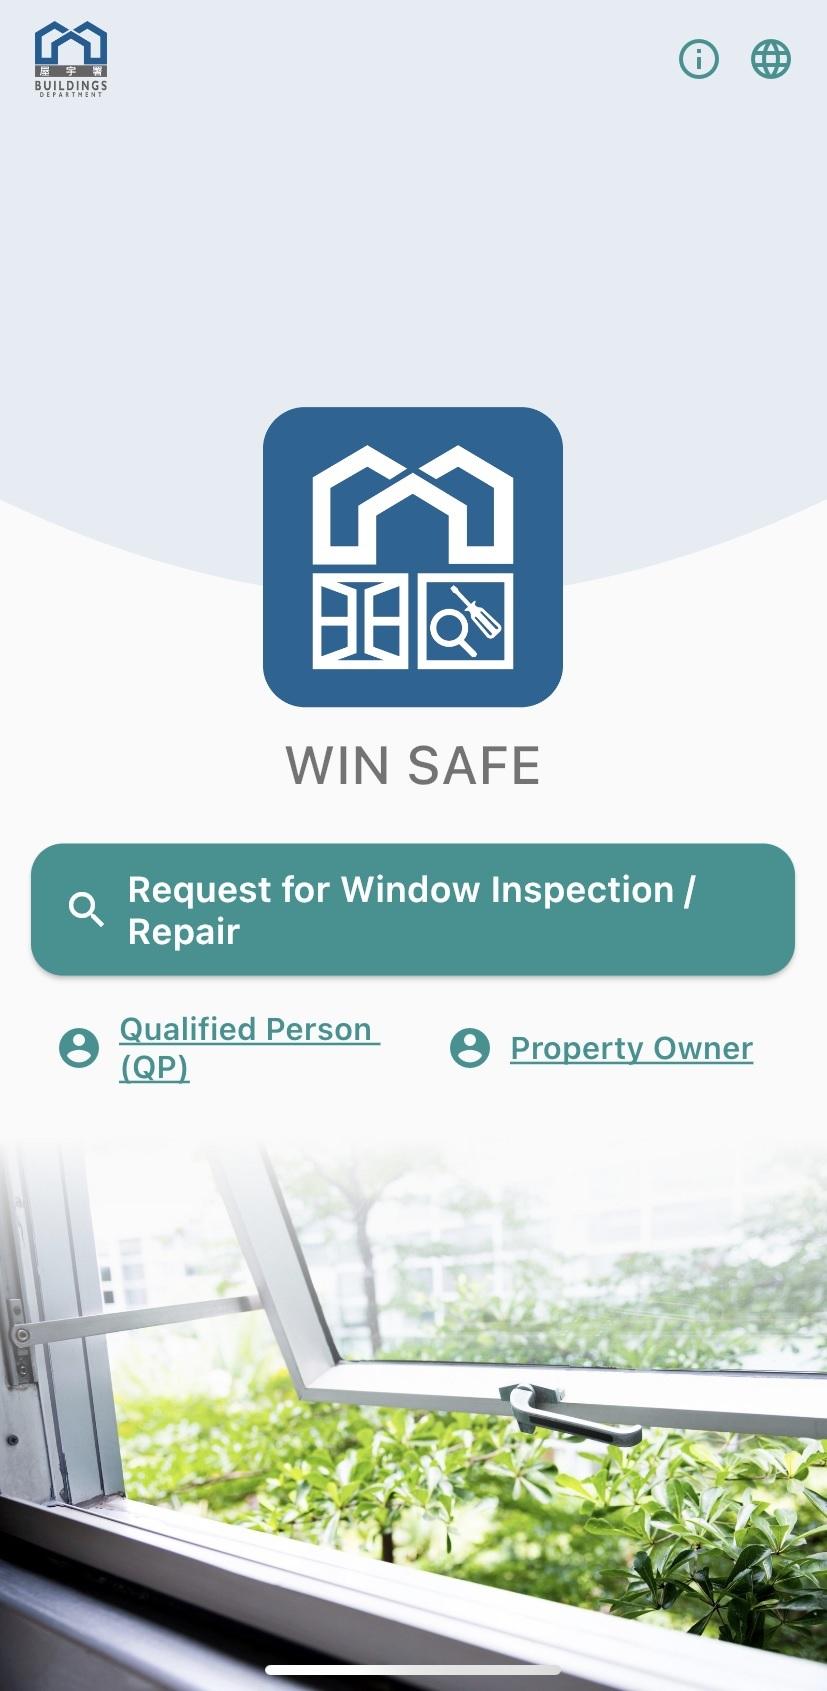 The Buildings Department today (August 8) launched the "WIN SAFE" mobile application to enable property owners to search for and appoint Qualified Persons for early compliance of Mandatory Window Inspection Scheme notices.